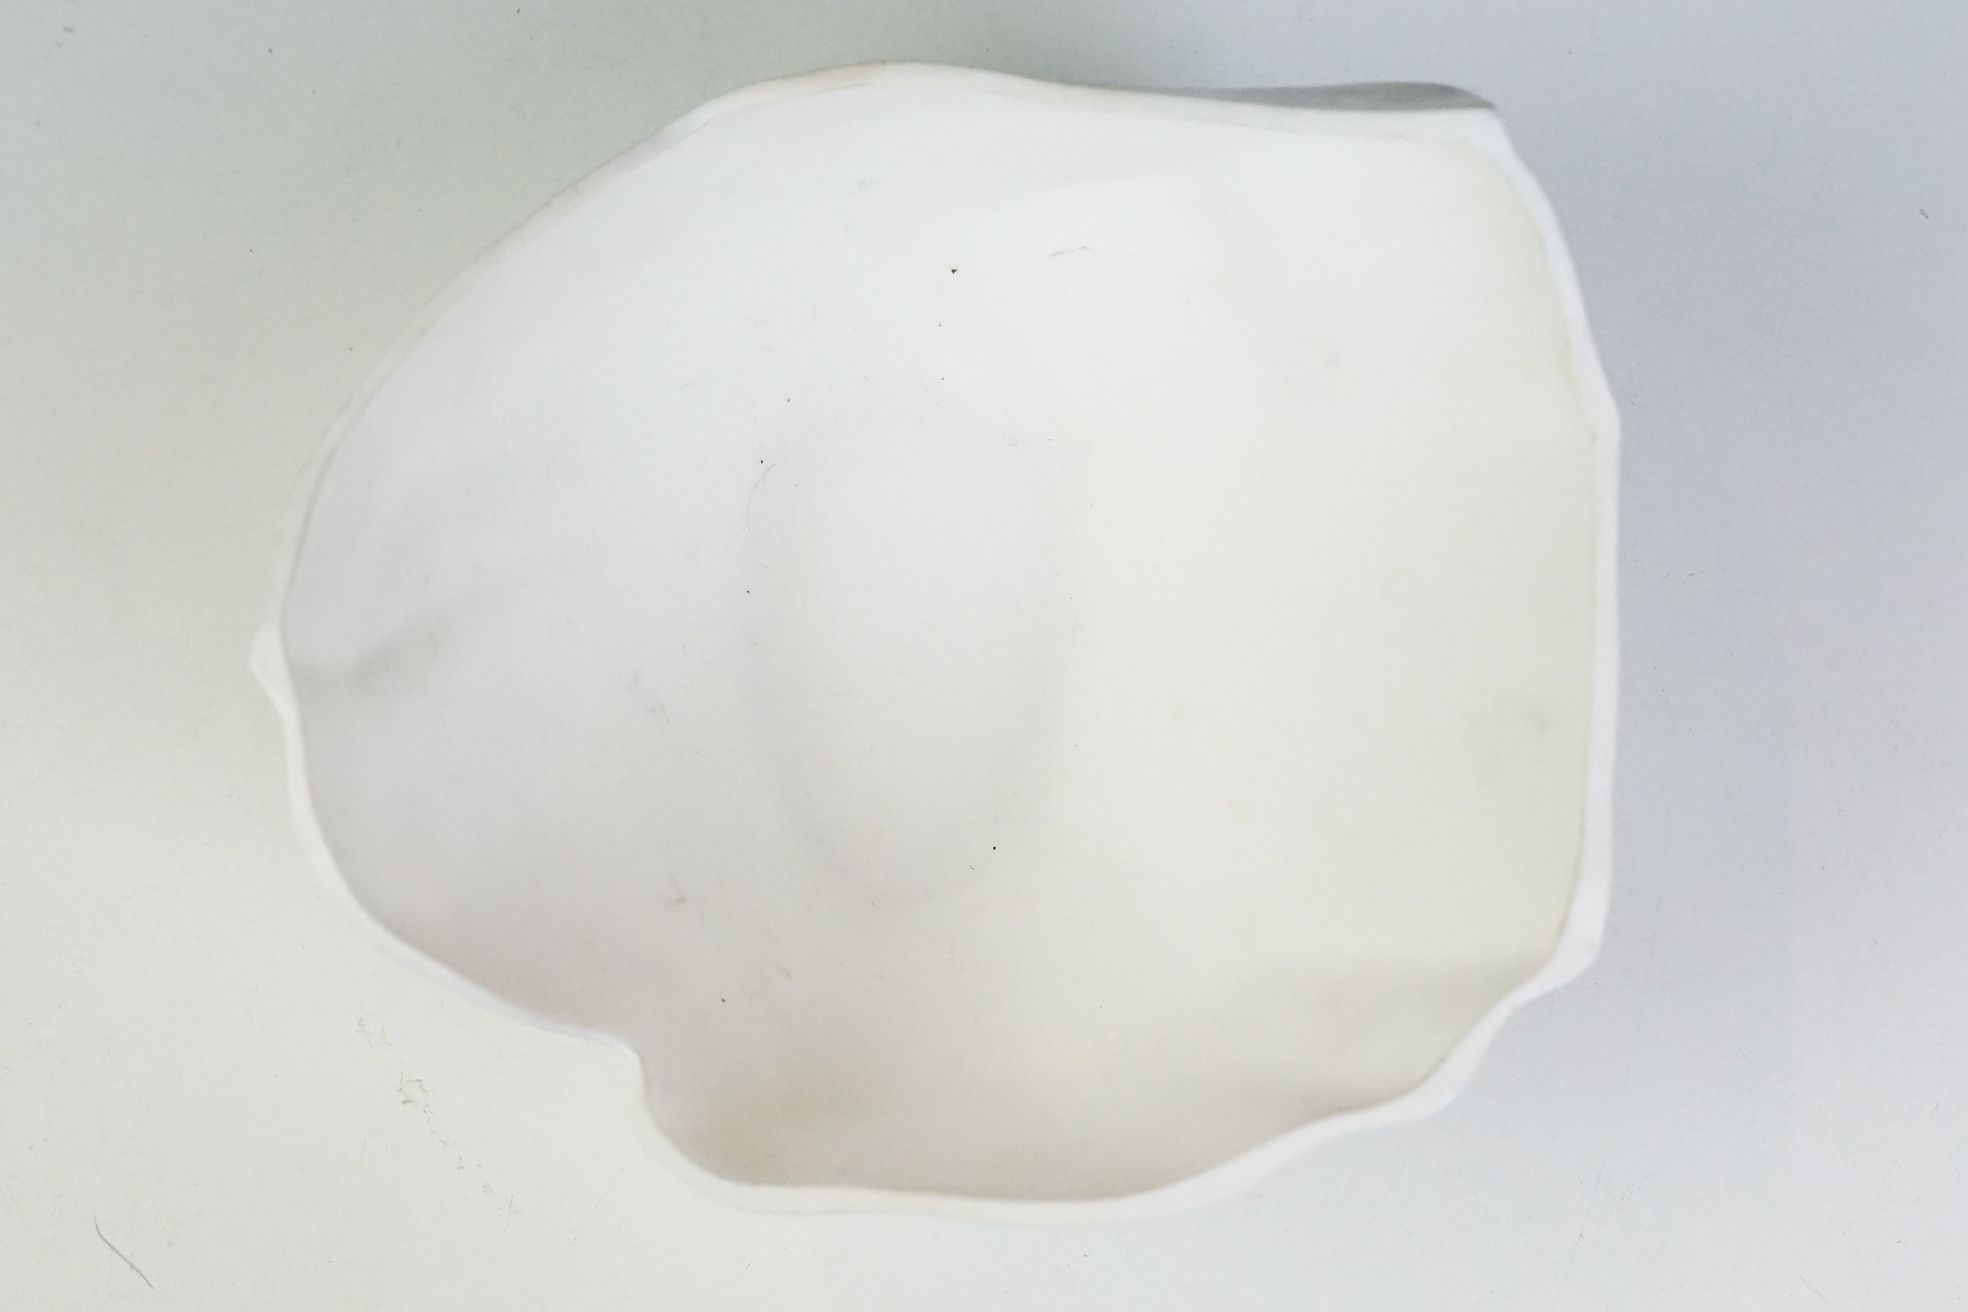 Frank Gehry for Tiffany & Co white ceramic rock series bowl. Tiffany & co mark to base along with - Image 6 of 10